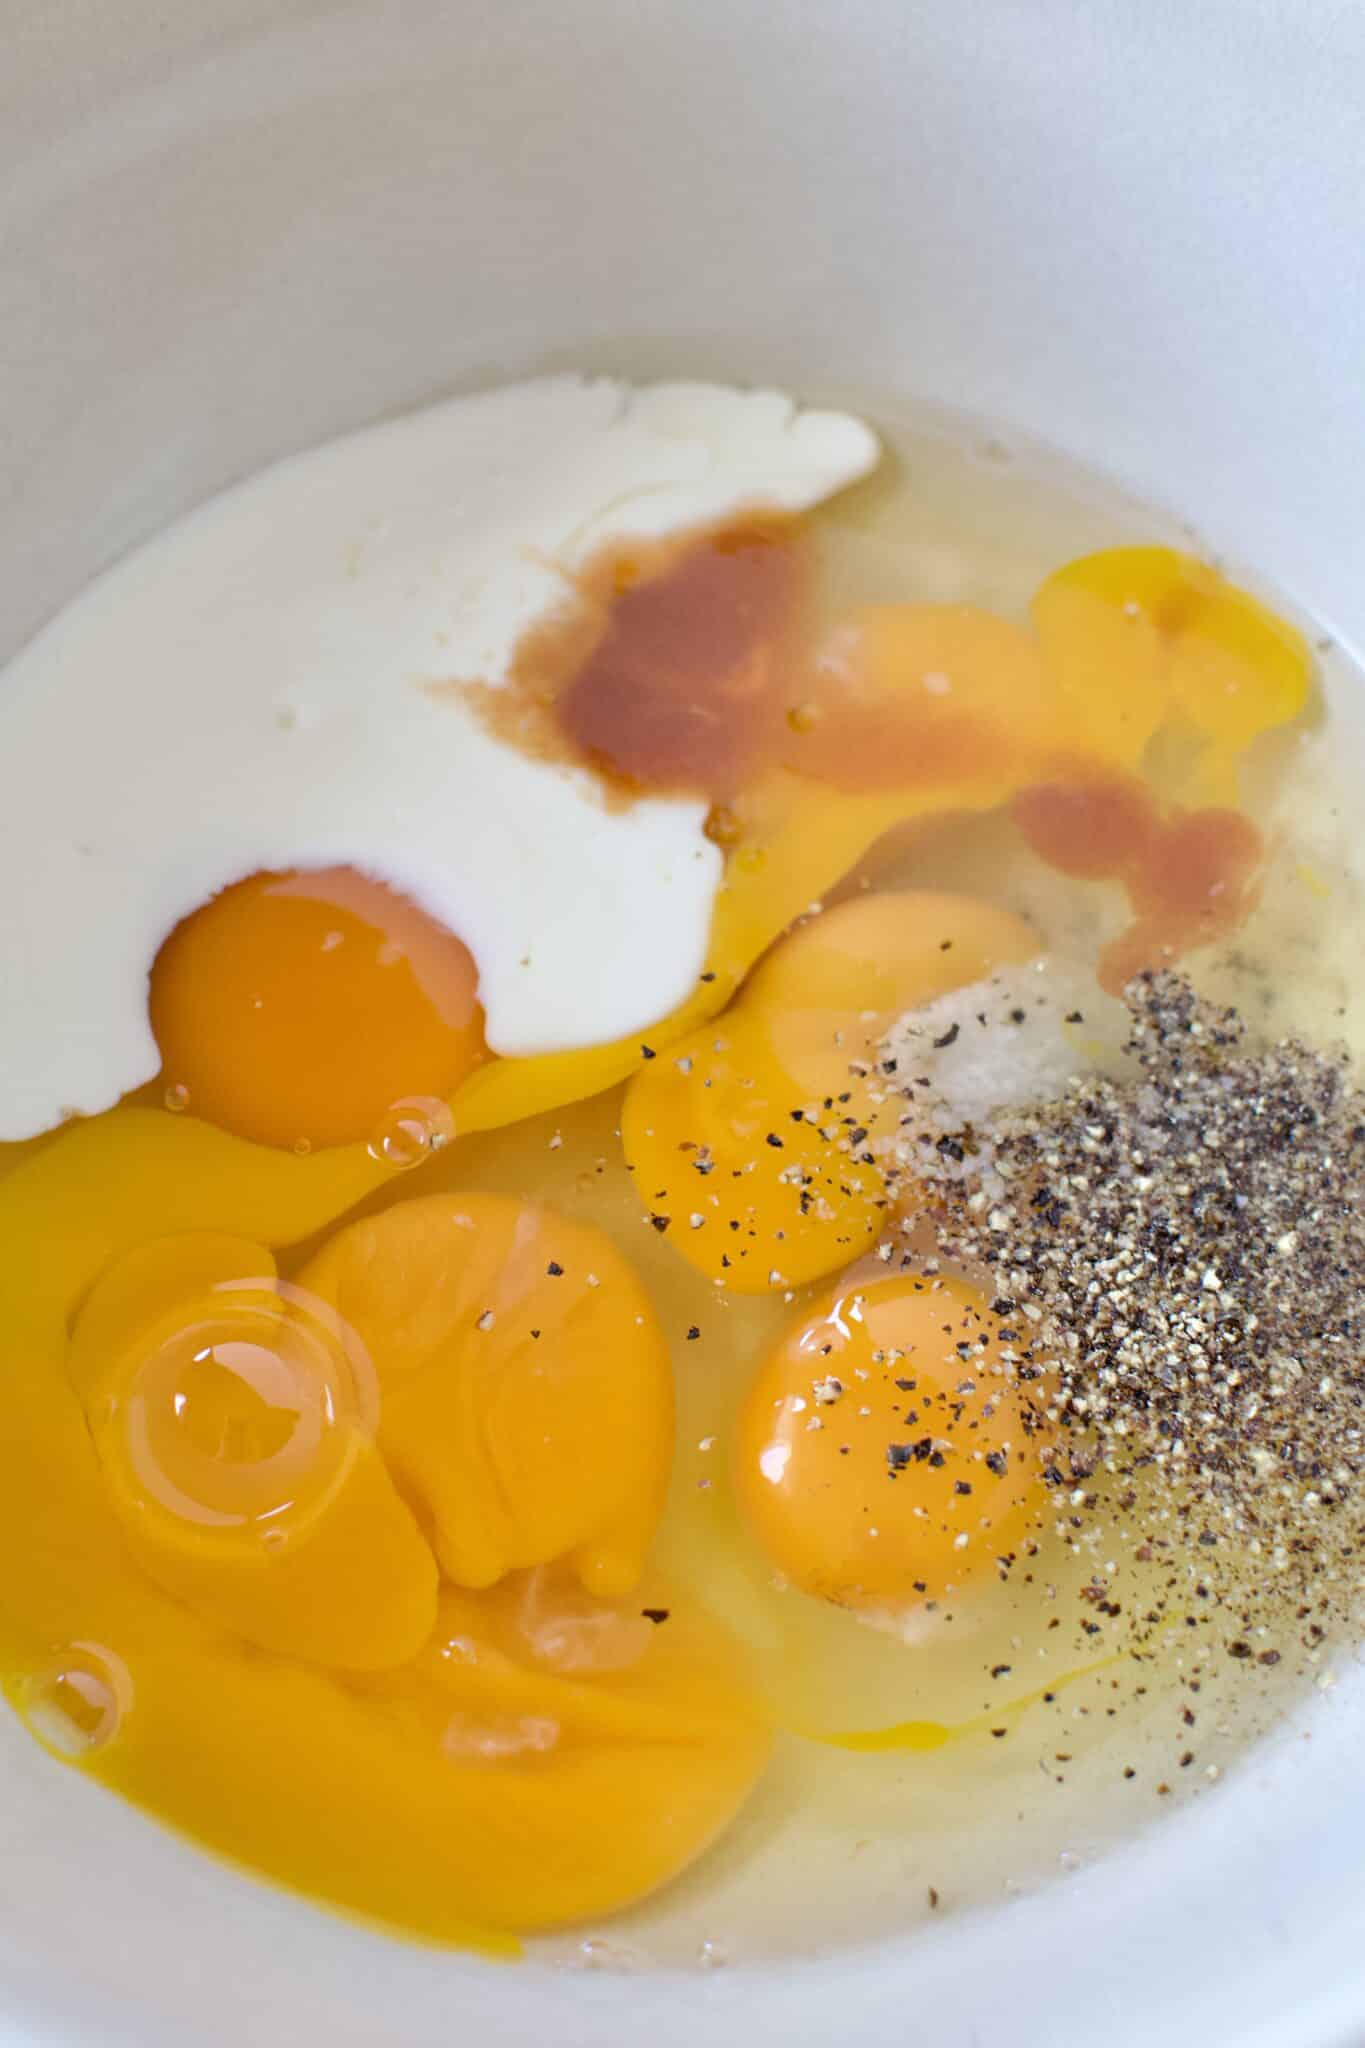 Eggs, Cream, hot sauce, salt, and pepper in a bowl ready to whipped up.